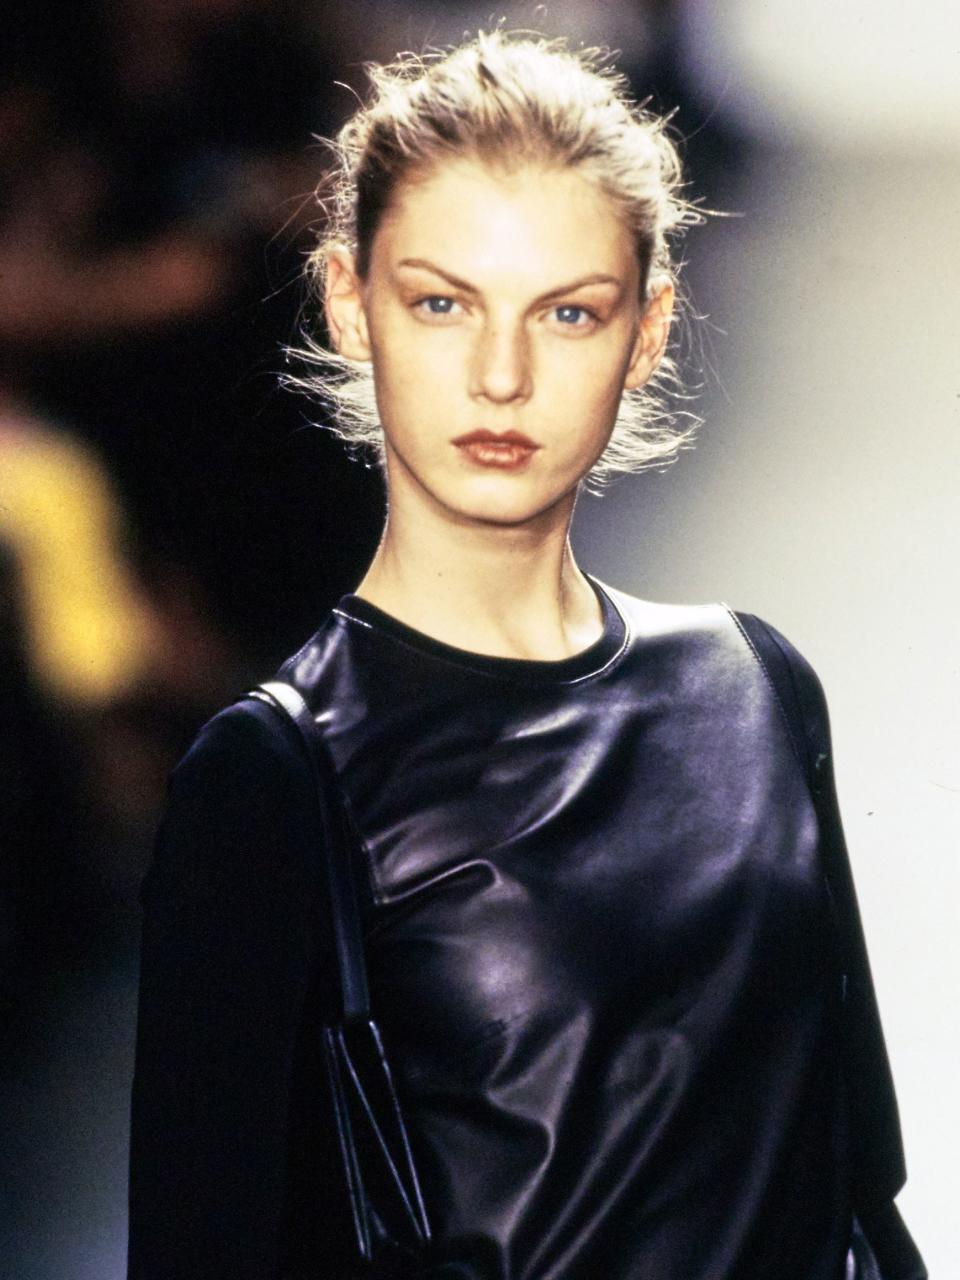 From a fresh-faced Kate Moss on the Spring 1994 runway to a subtle speck of silver in Fall 2017, less-is-more beauty has long reigned at Calvin Klein.